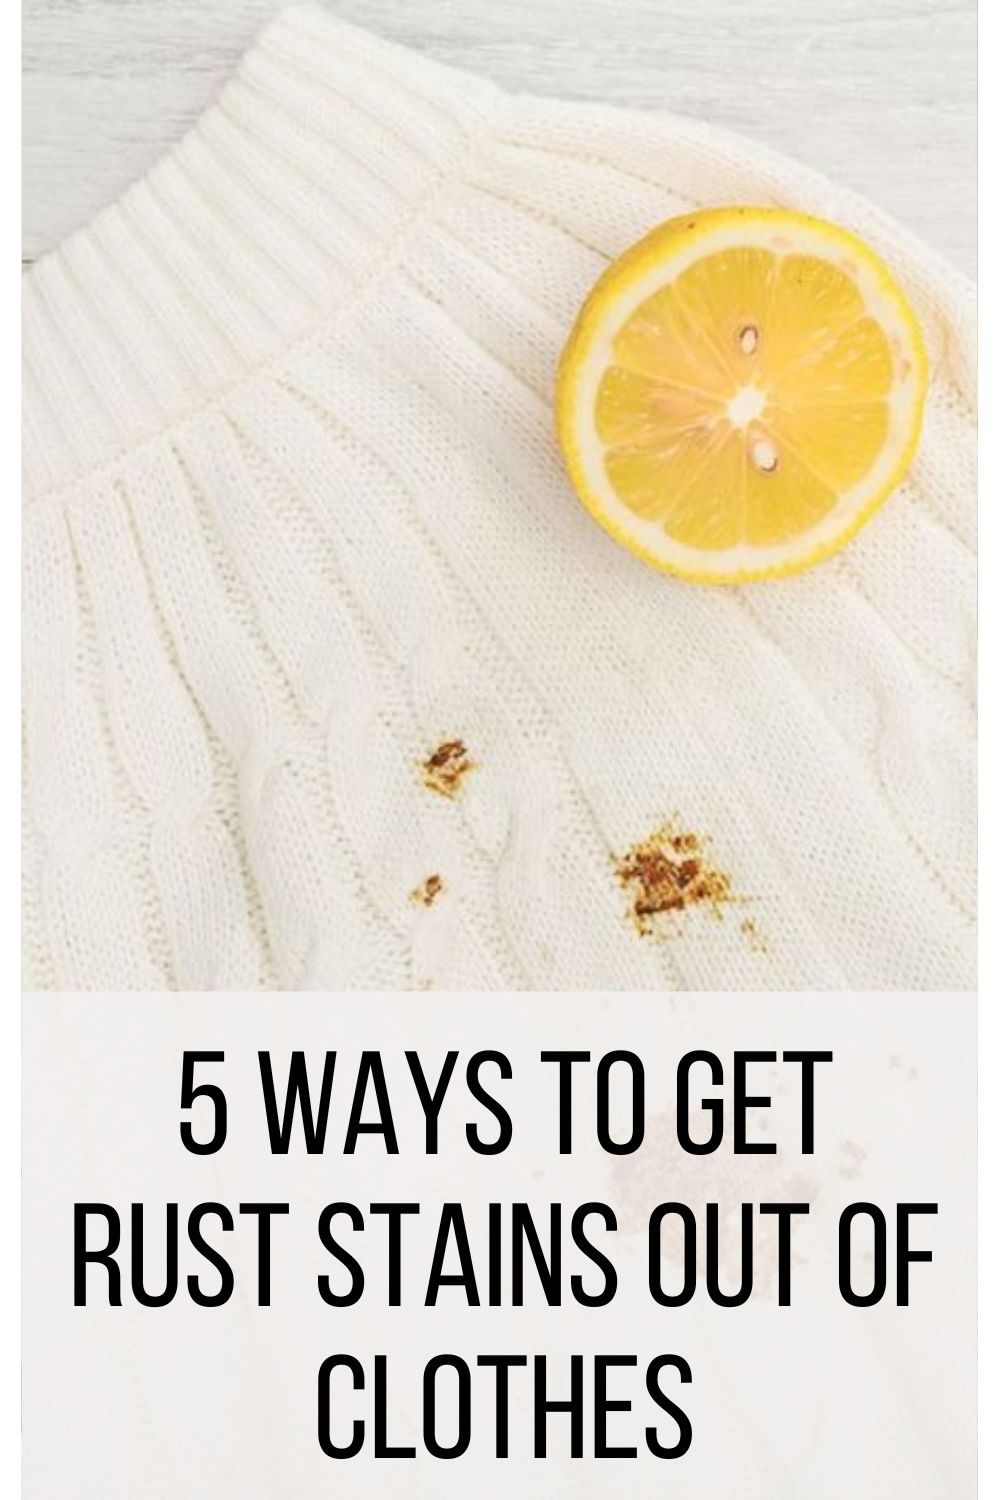 5 Ways to Get Rust Stains Out of Clothes